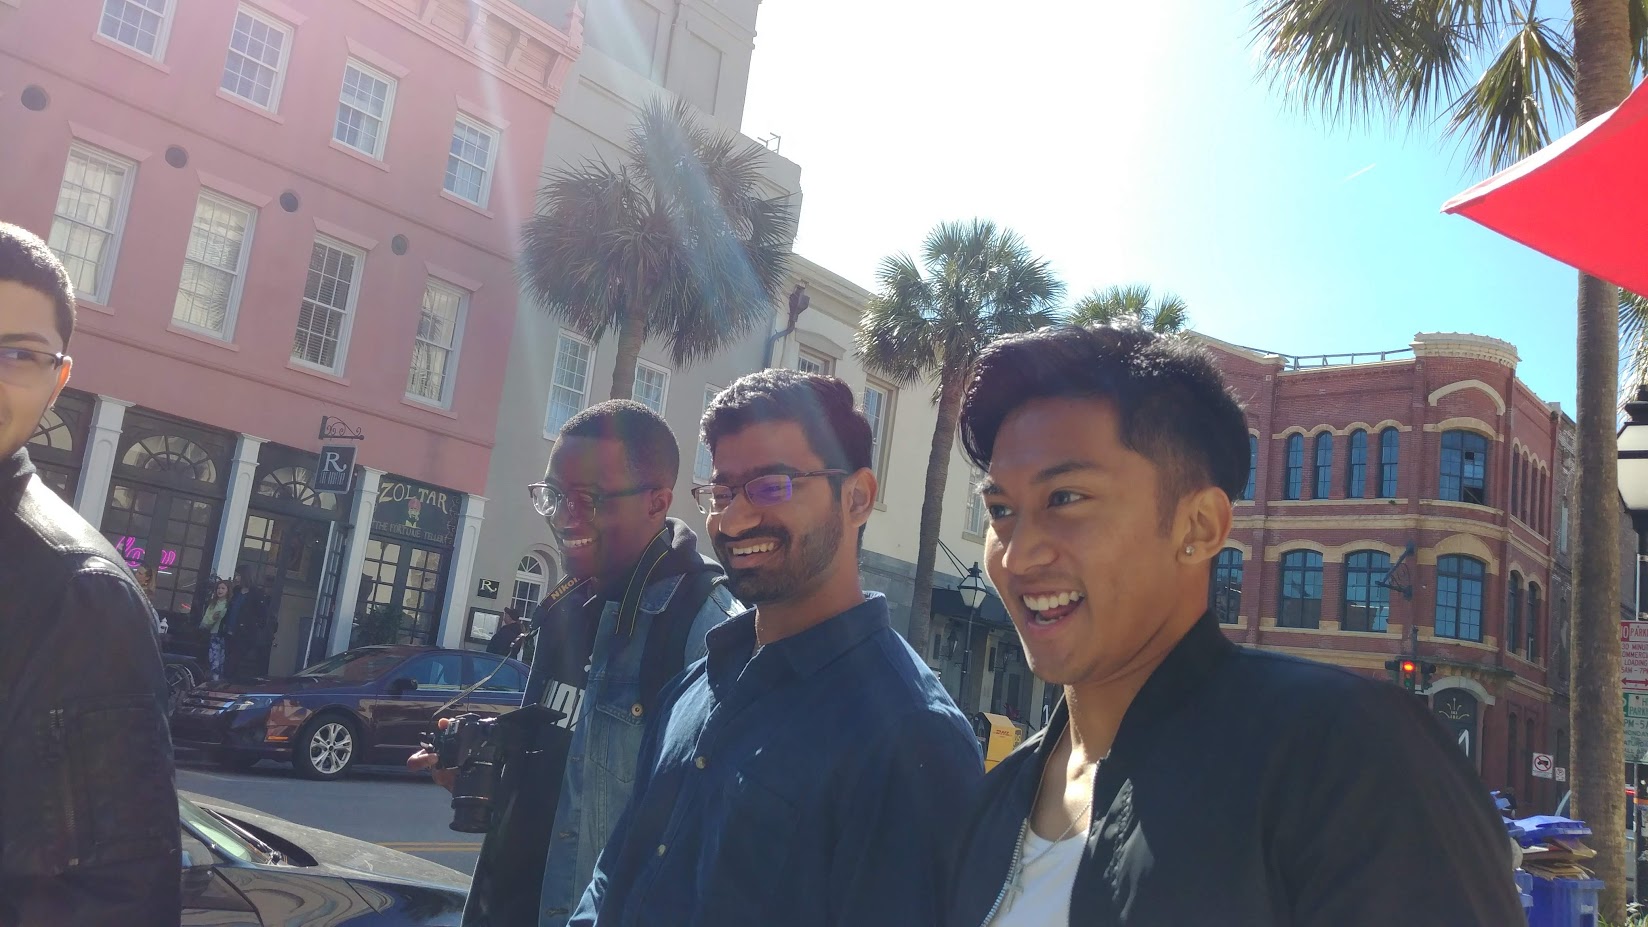 pic of josh and friends in downtown